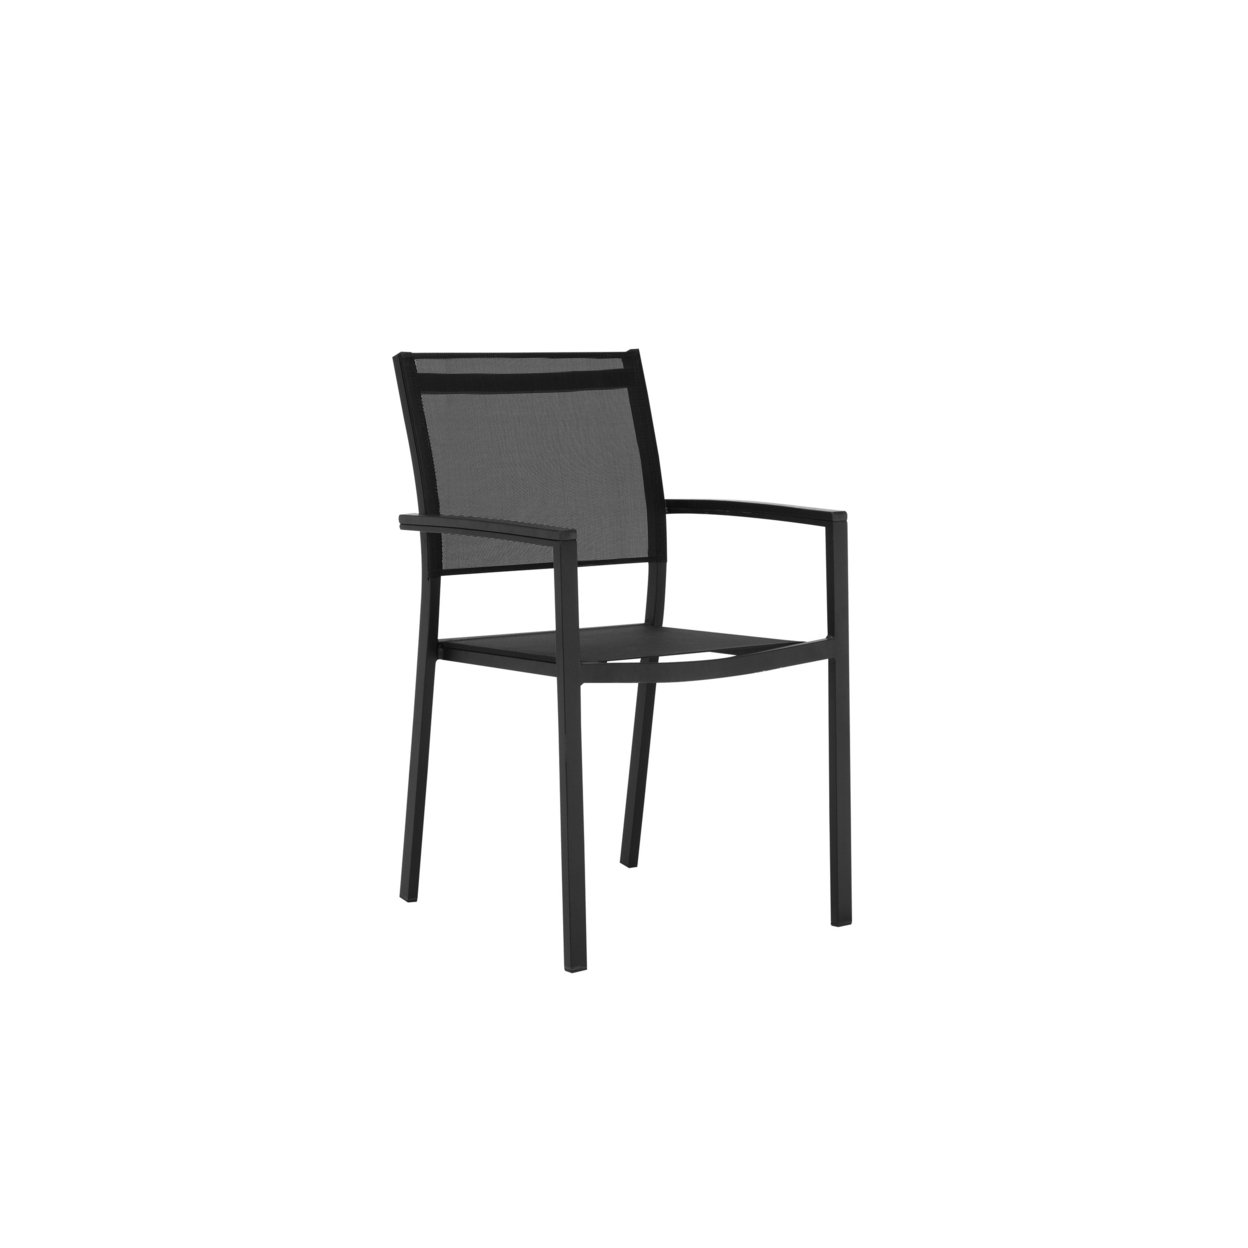 Fifi 21 Inch Set of 6 Dining Chairs, Black Aluminum Frame, Easily Stackable- Saltoro Sherpi - image 3 of 5